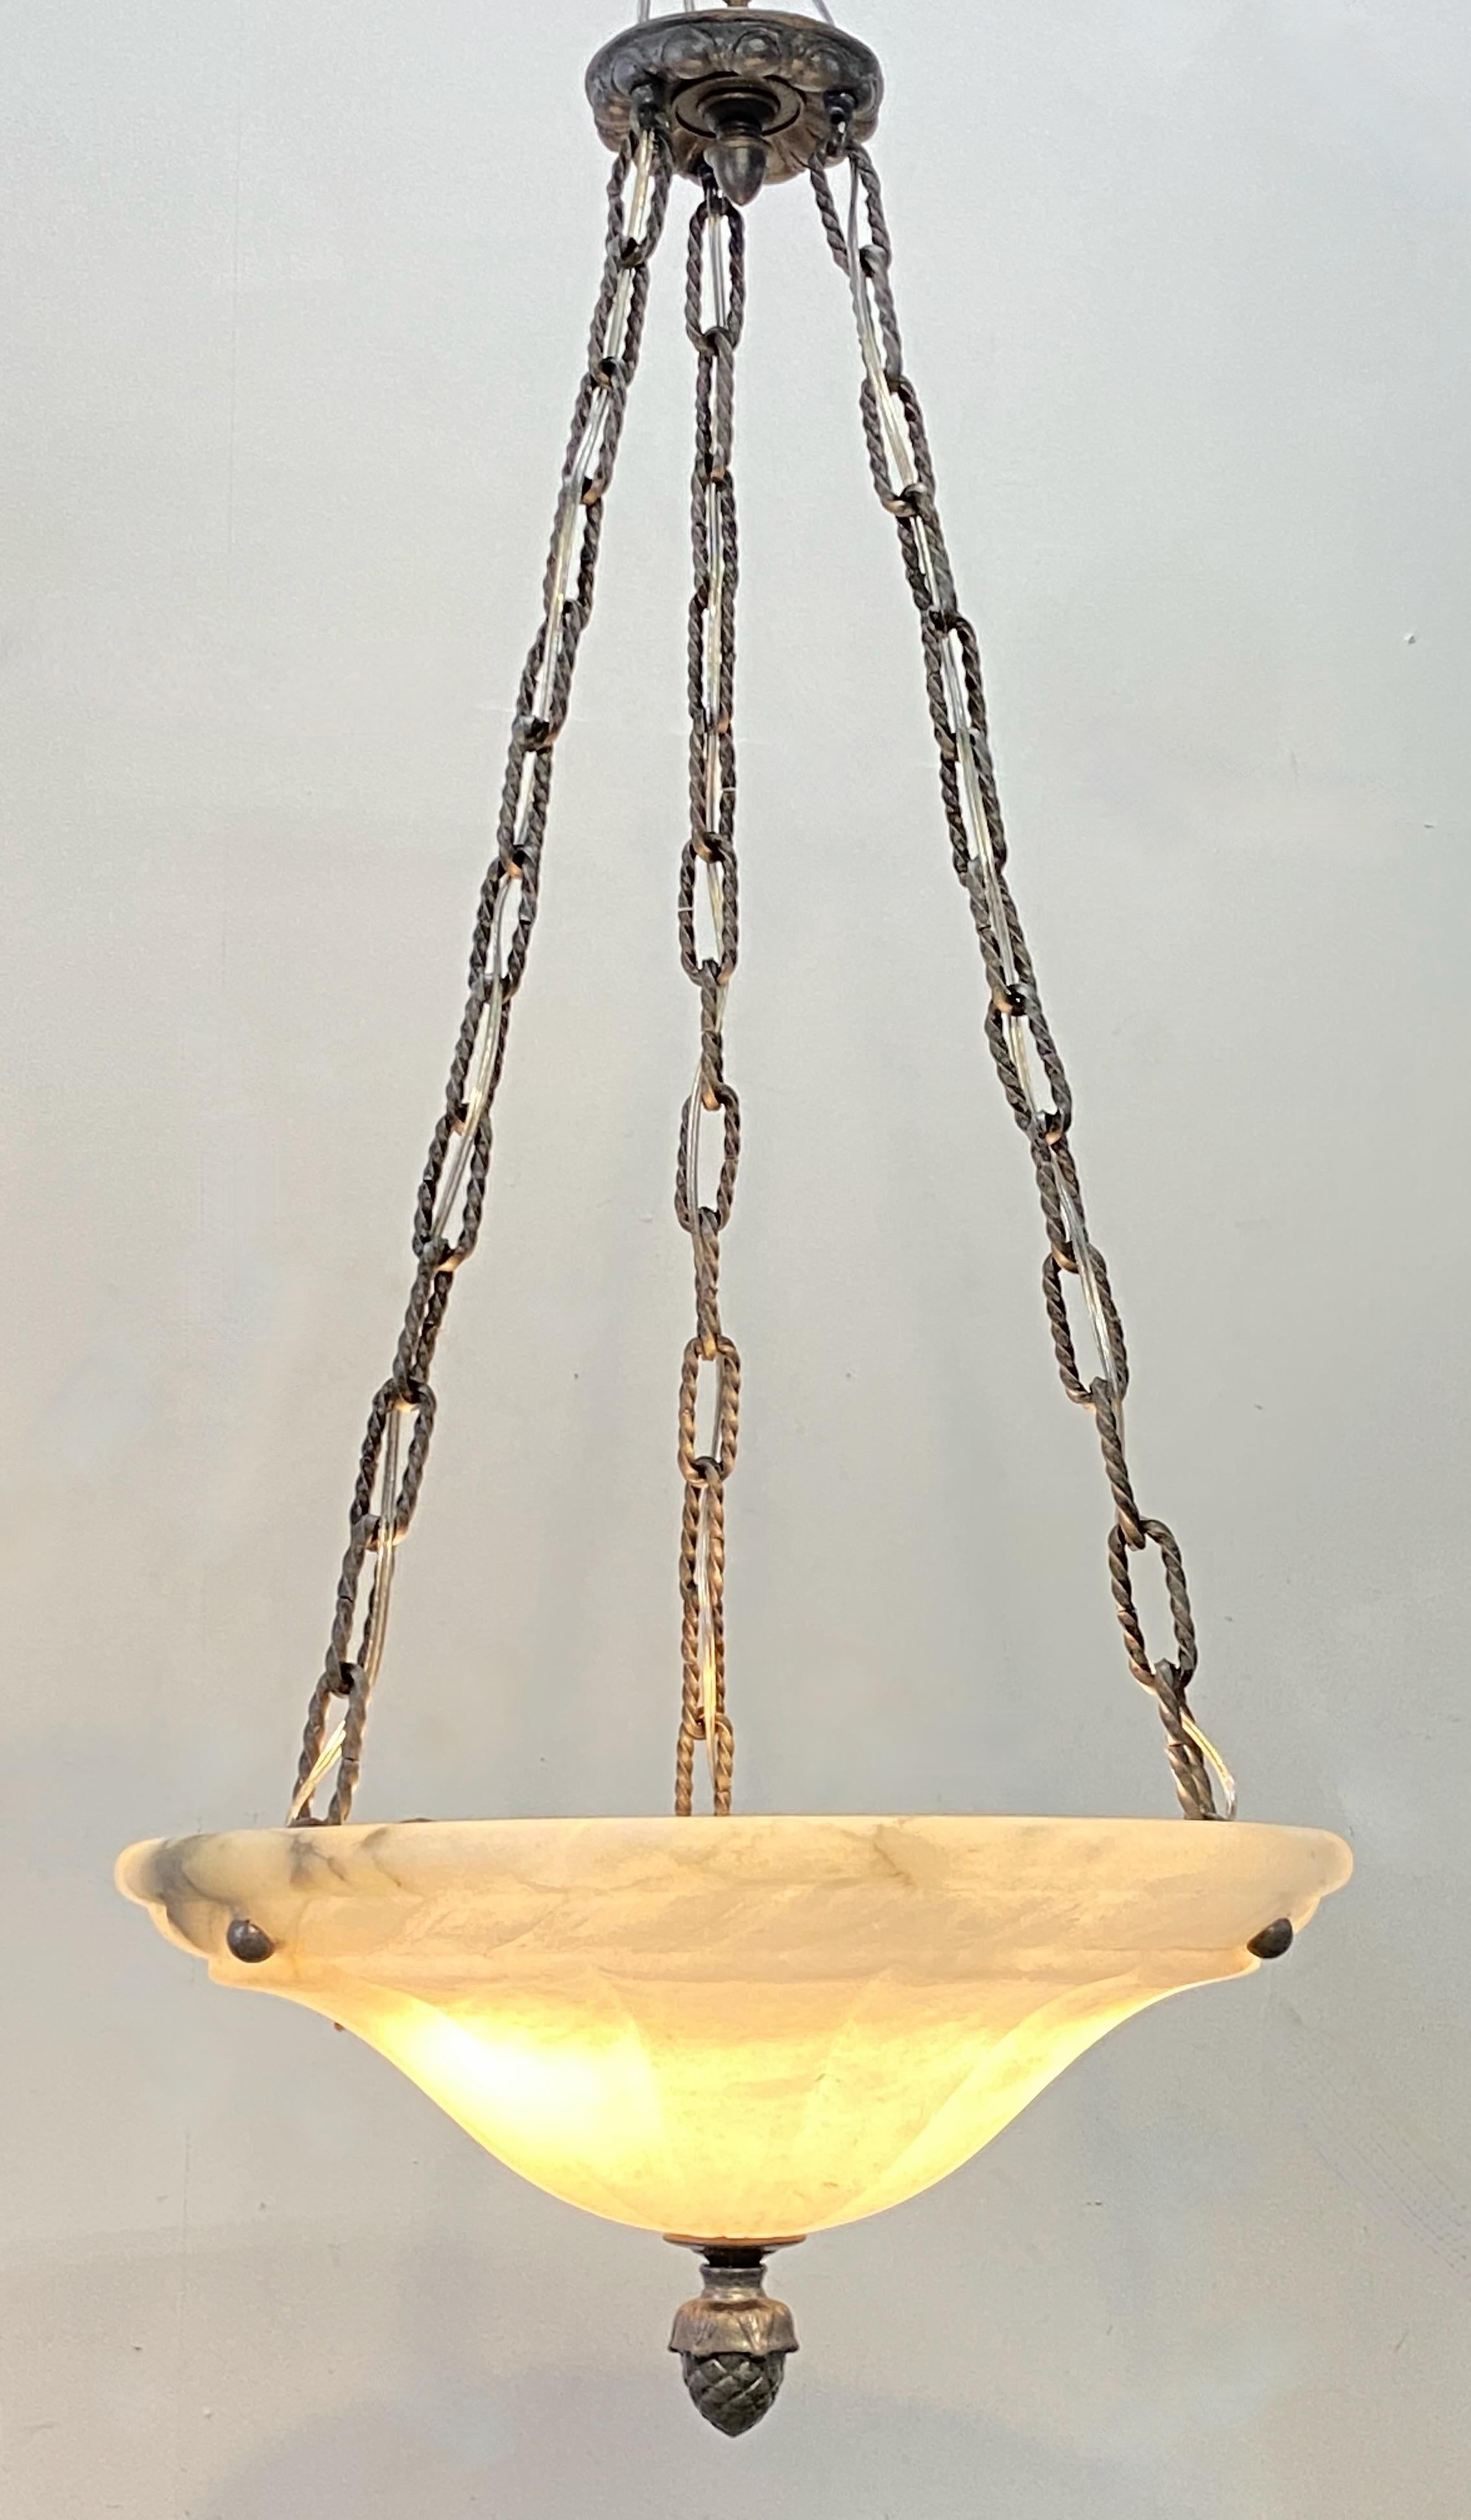 Elegant pendant shaped carved alabaster light fixture with brass hardware.
Recently re-wired and ready to install. We can adjust the the chain measurement to buyers specification.
We have two available, for a matched pair. Sold separately.
20th